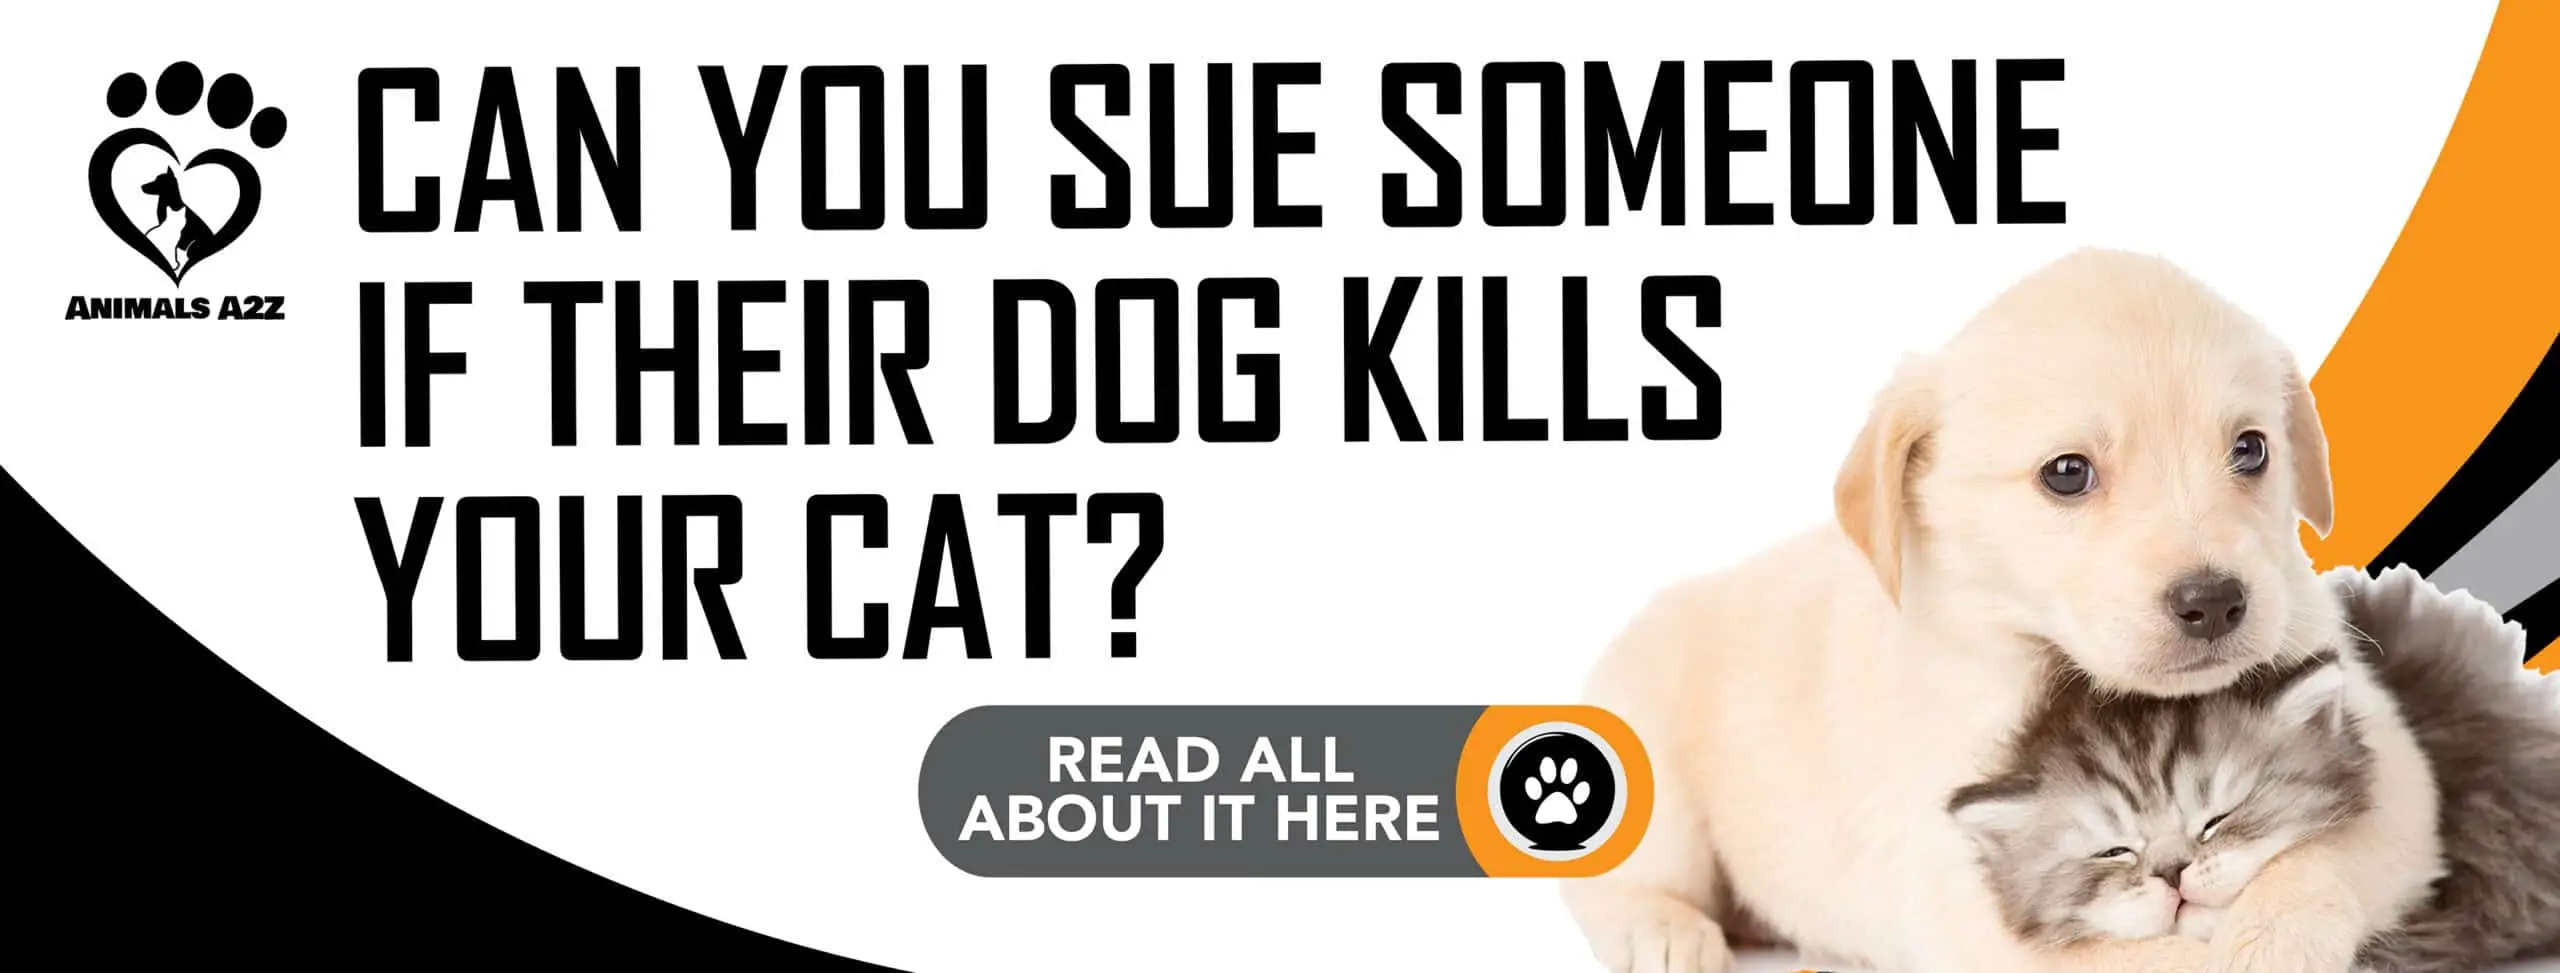 Can you sue someone if their dog kills your cat?